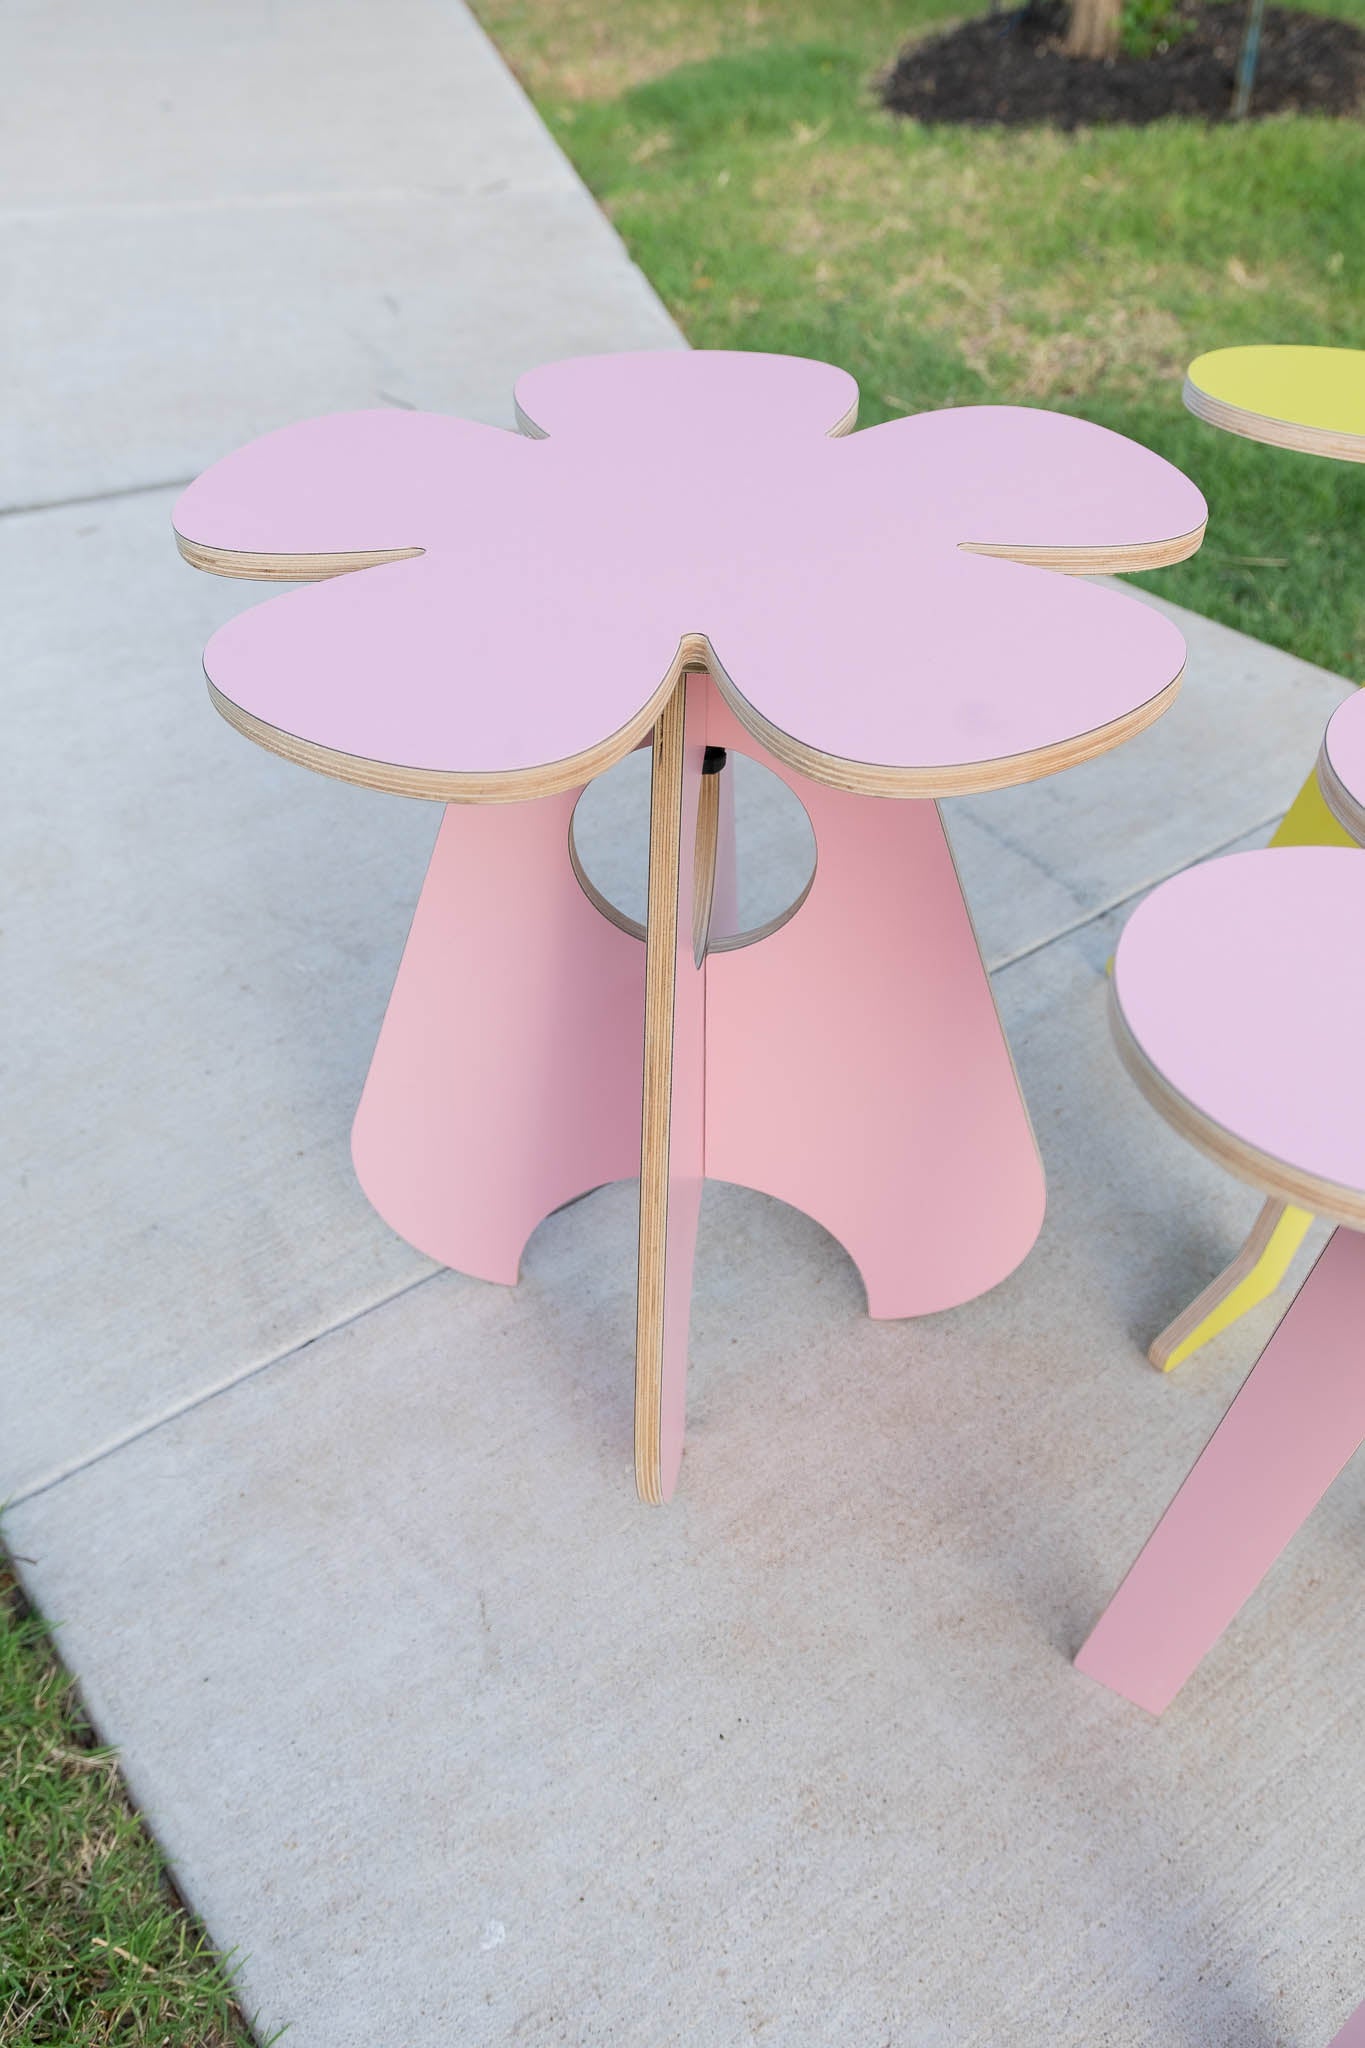 rocket side table with flower #4 in all pink